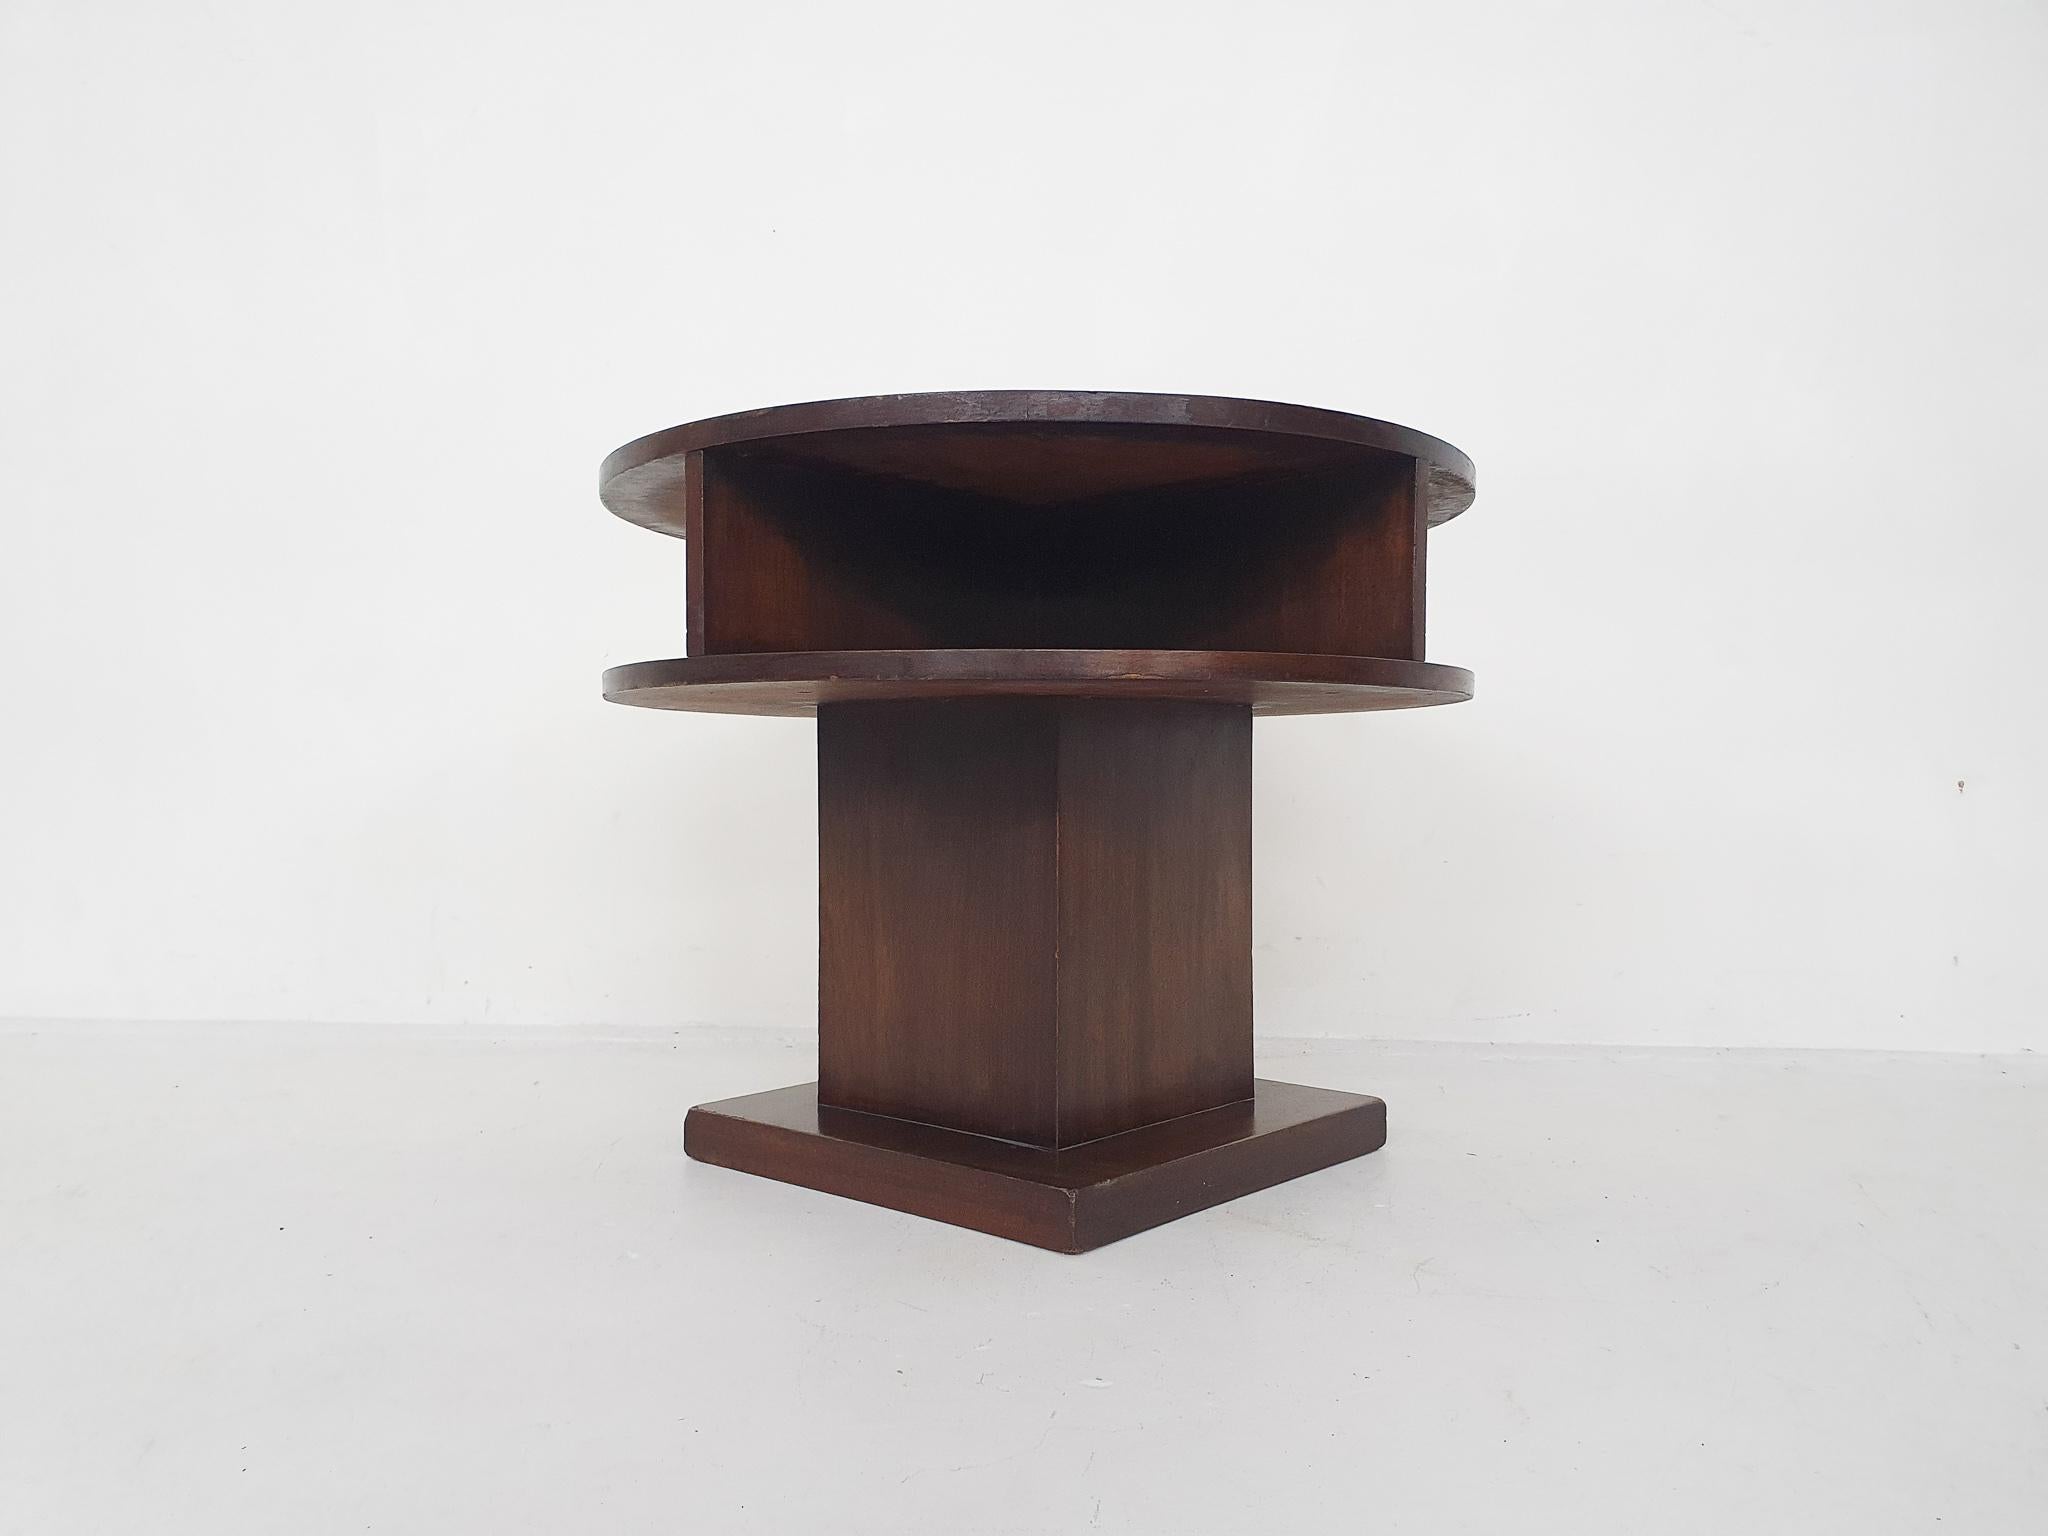 Mahogany wooden side table with storage space. In good original condition.